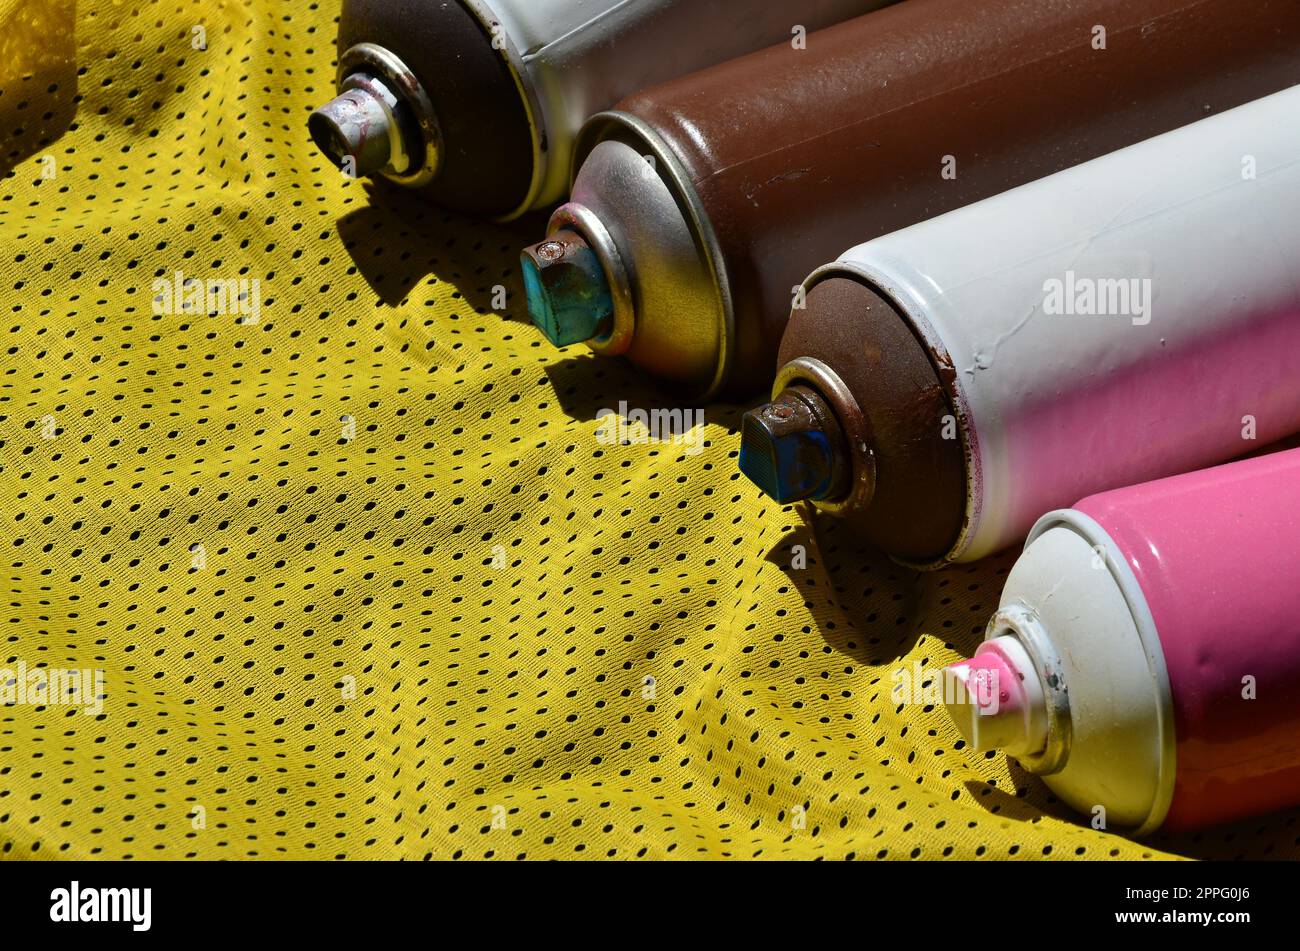 Several used aerosol paint sprayers lie on the sports shirt of a basketball player made of polyester fabric. The concept of youth street art, active sports and eventful lifestyle Stock Photo